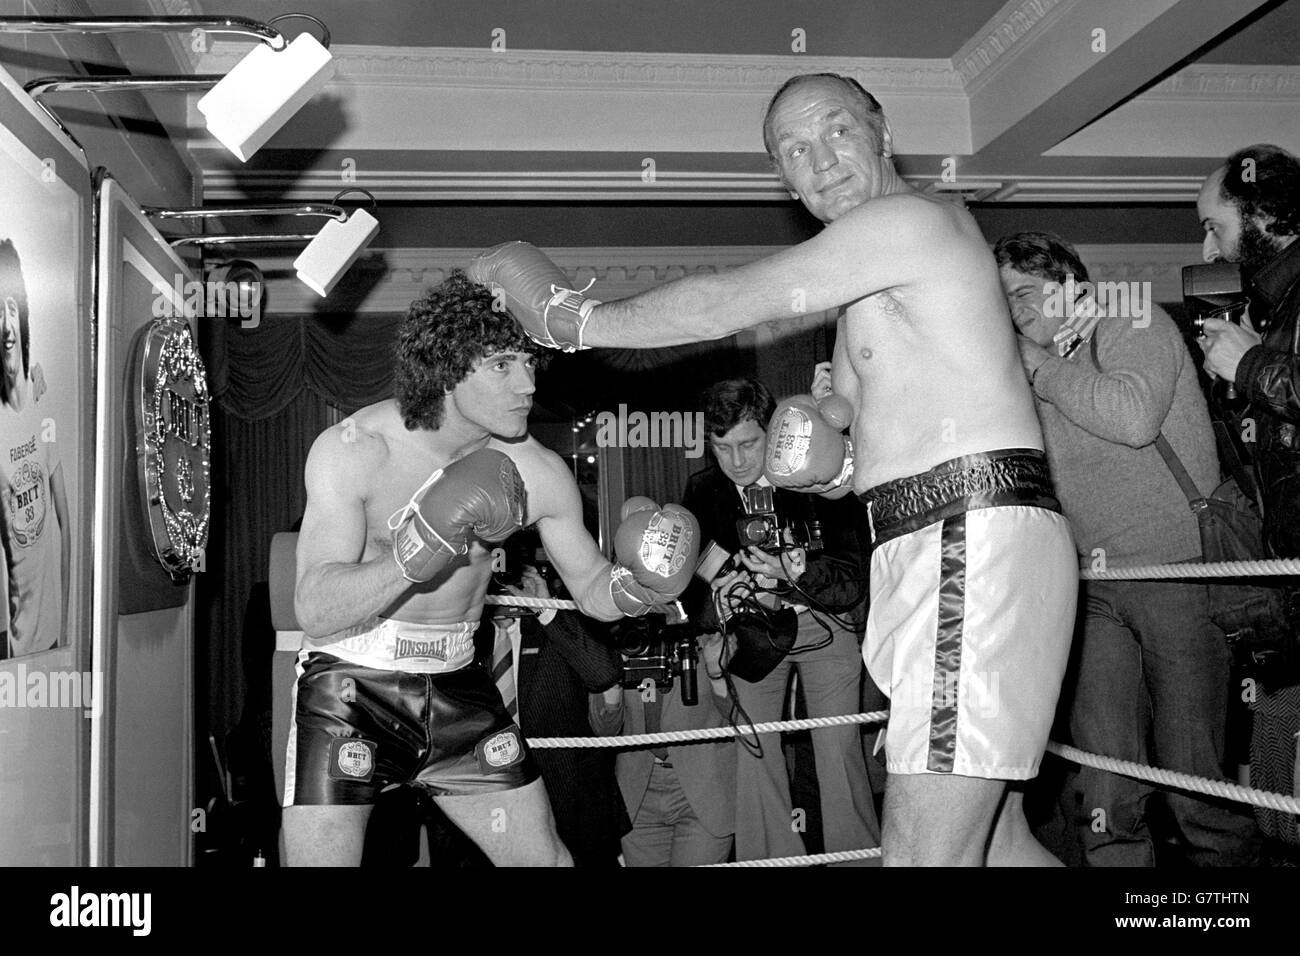 Kevin Keegan and Henry Cooper Advertise Brut 33. Kevin Keegan (l) and Henry Cooper (r) fool around in a miniature boxing ring to promote Brut 33 aftershave Stock Photo